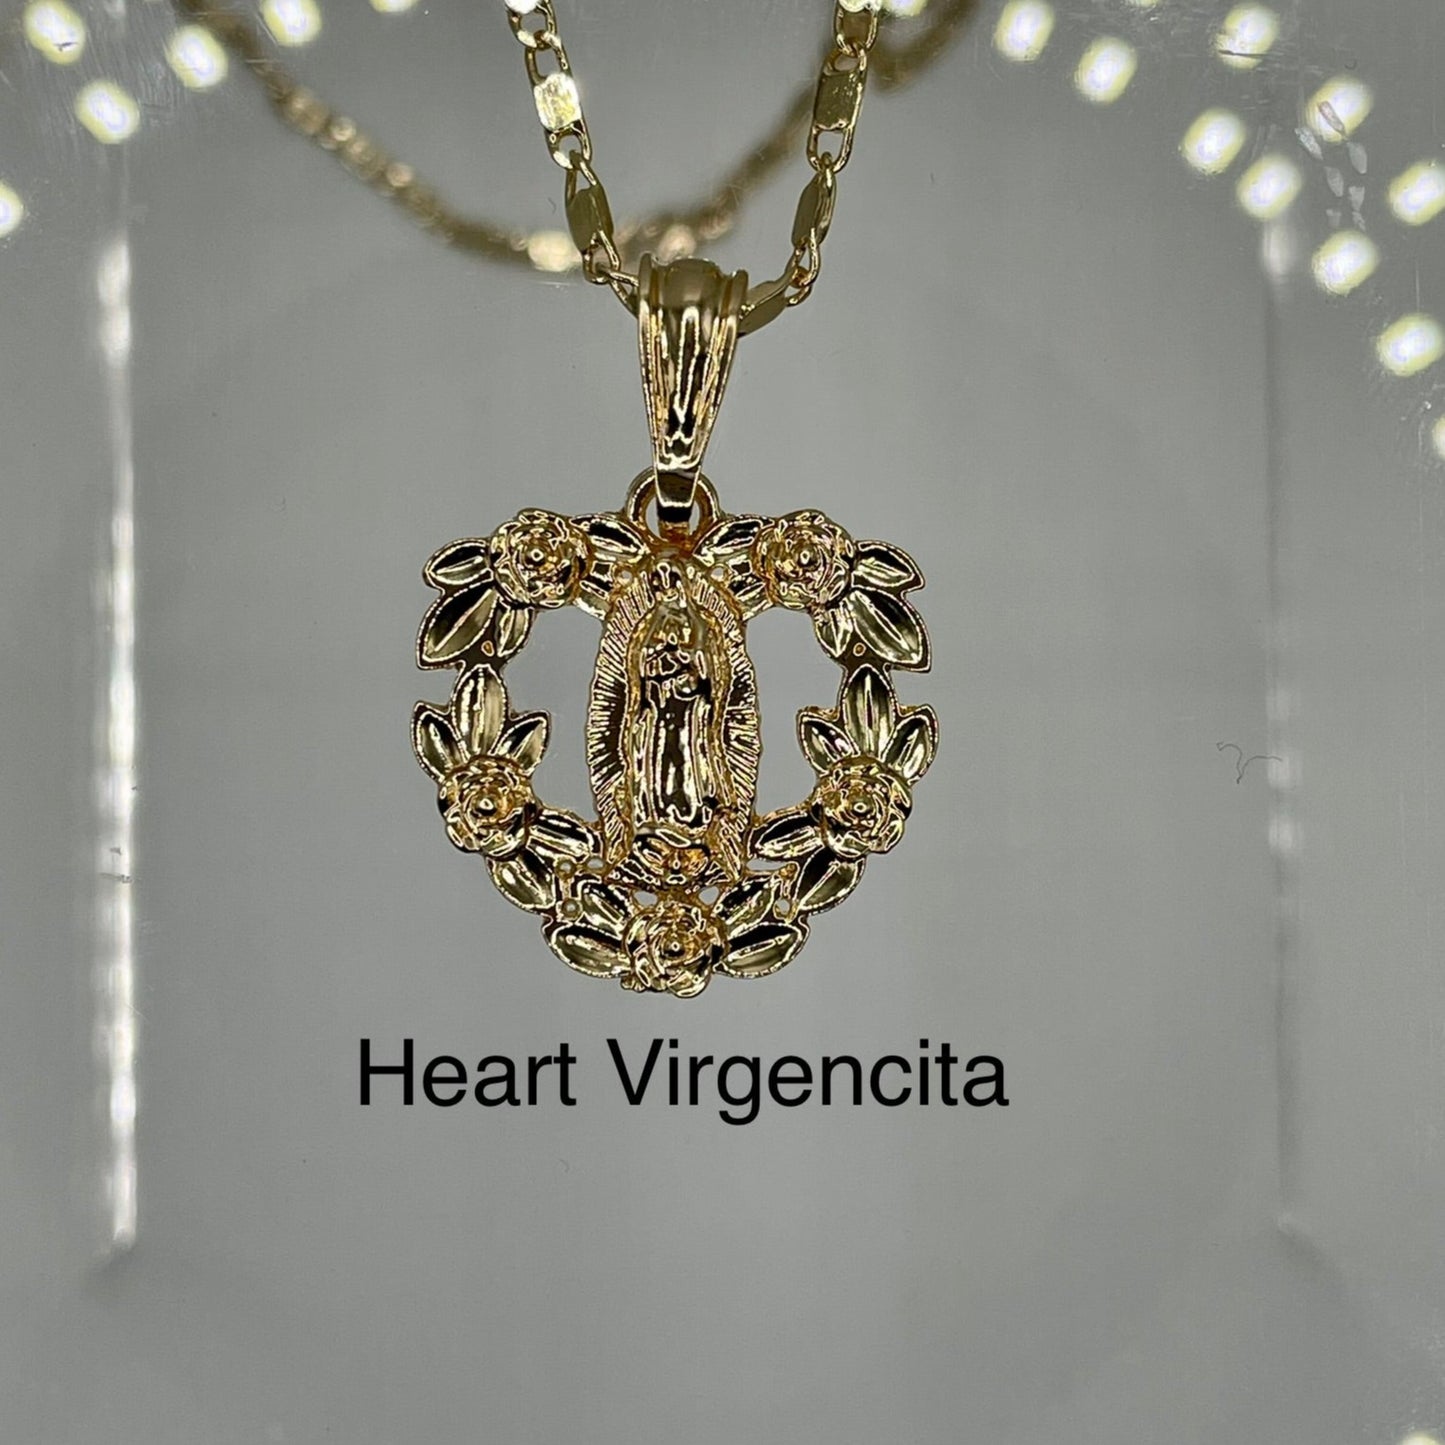 Heart virgencita pendant 14k gold plated on gold plated cute necklace. Virgen mary jewelry. Virgen maria jewelry. Joyas virgencita. Virgencita. Virgencita pendant.